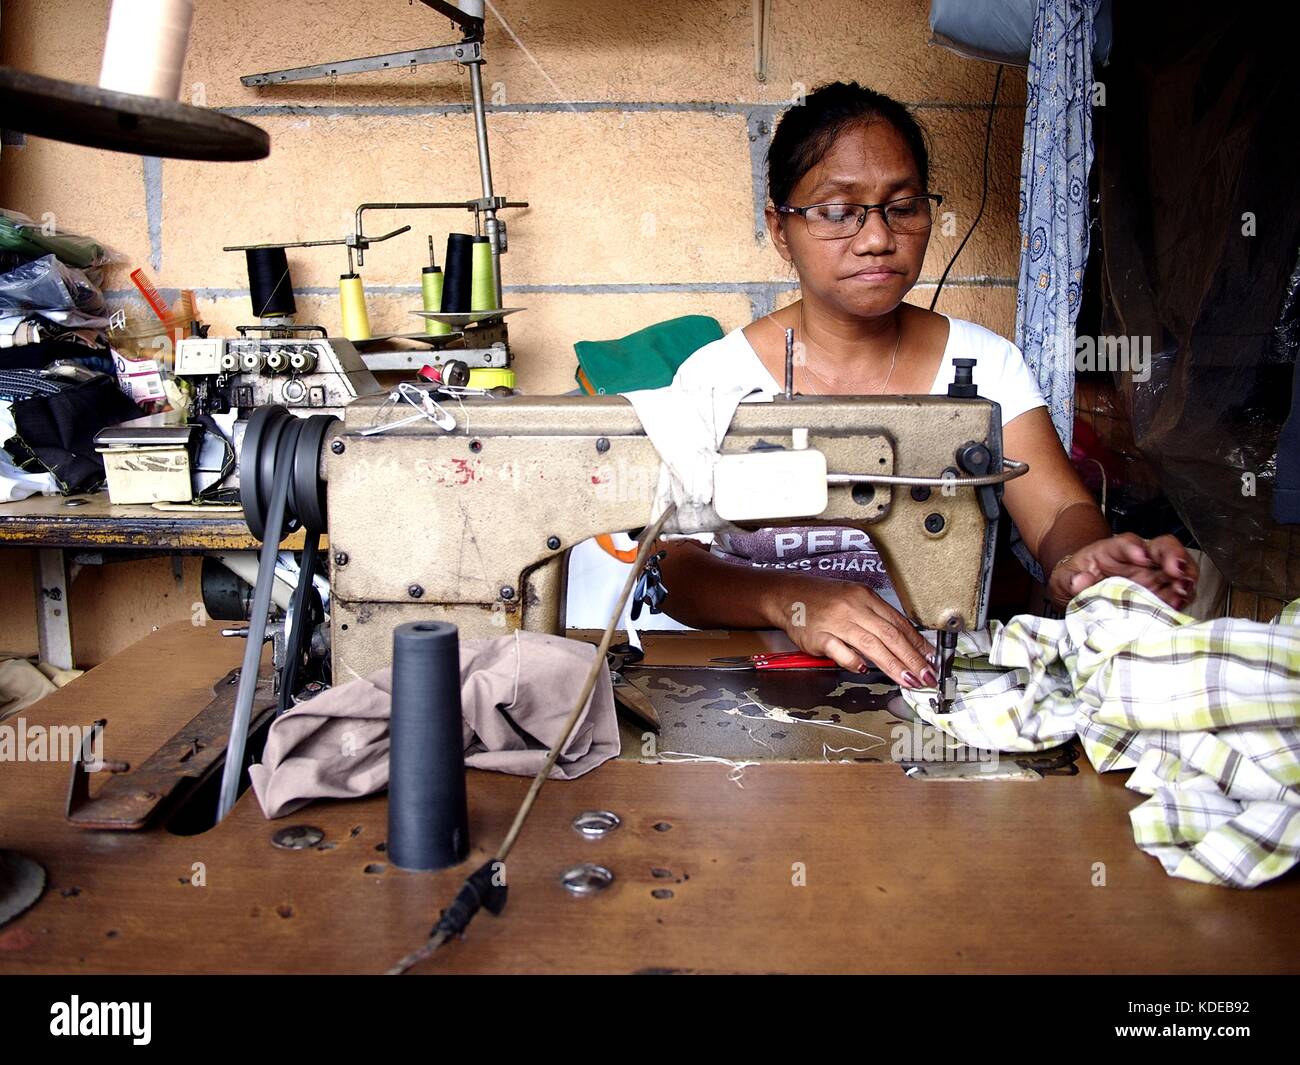 ANTIPOLO CITY, PHILIPPINES - OCTOBER 11, 2017: A dressmaker works